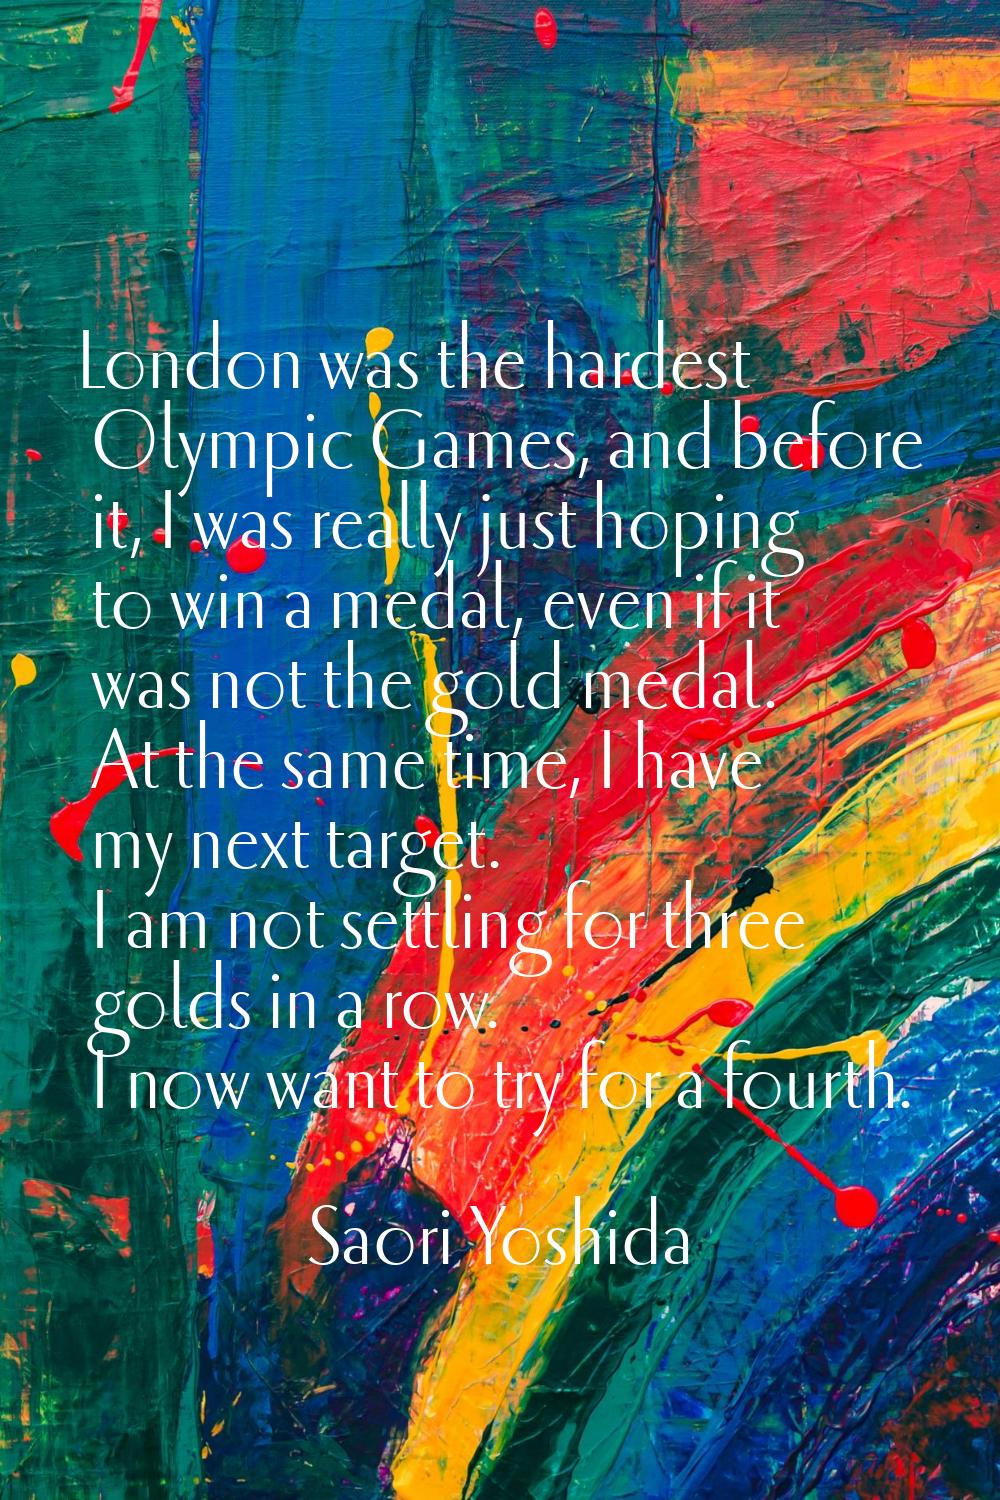 London was the hardest Olympic Games, and before it, I was really just hoping to win a medal, even 